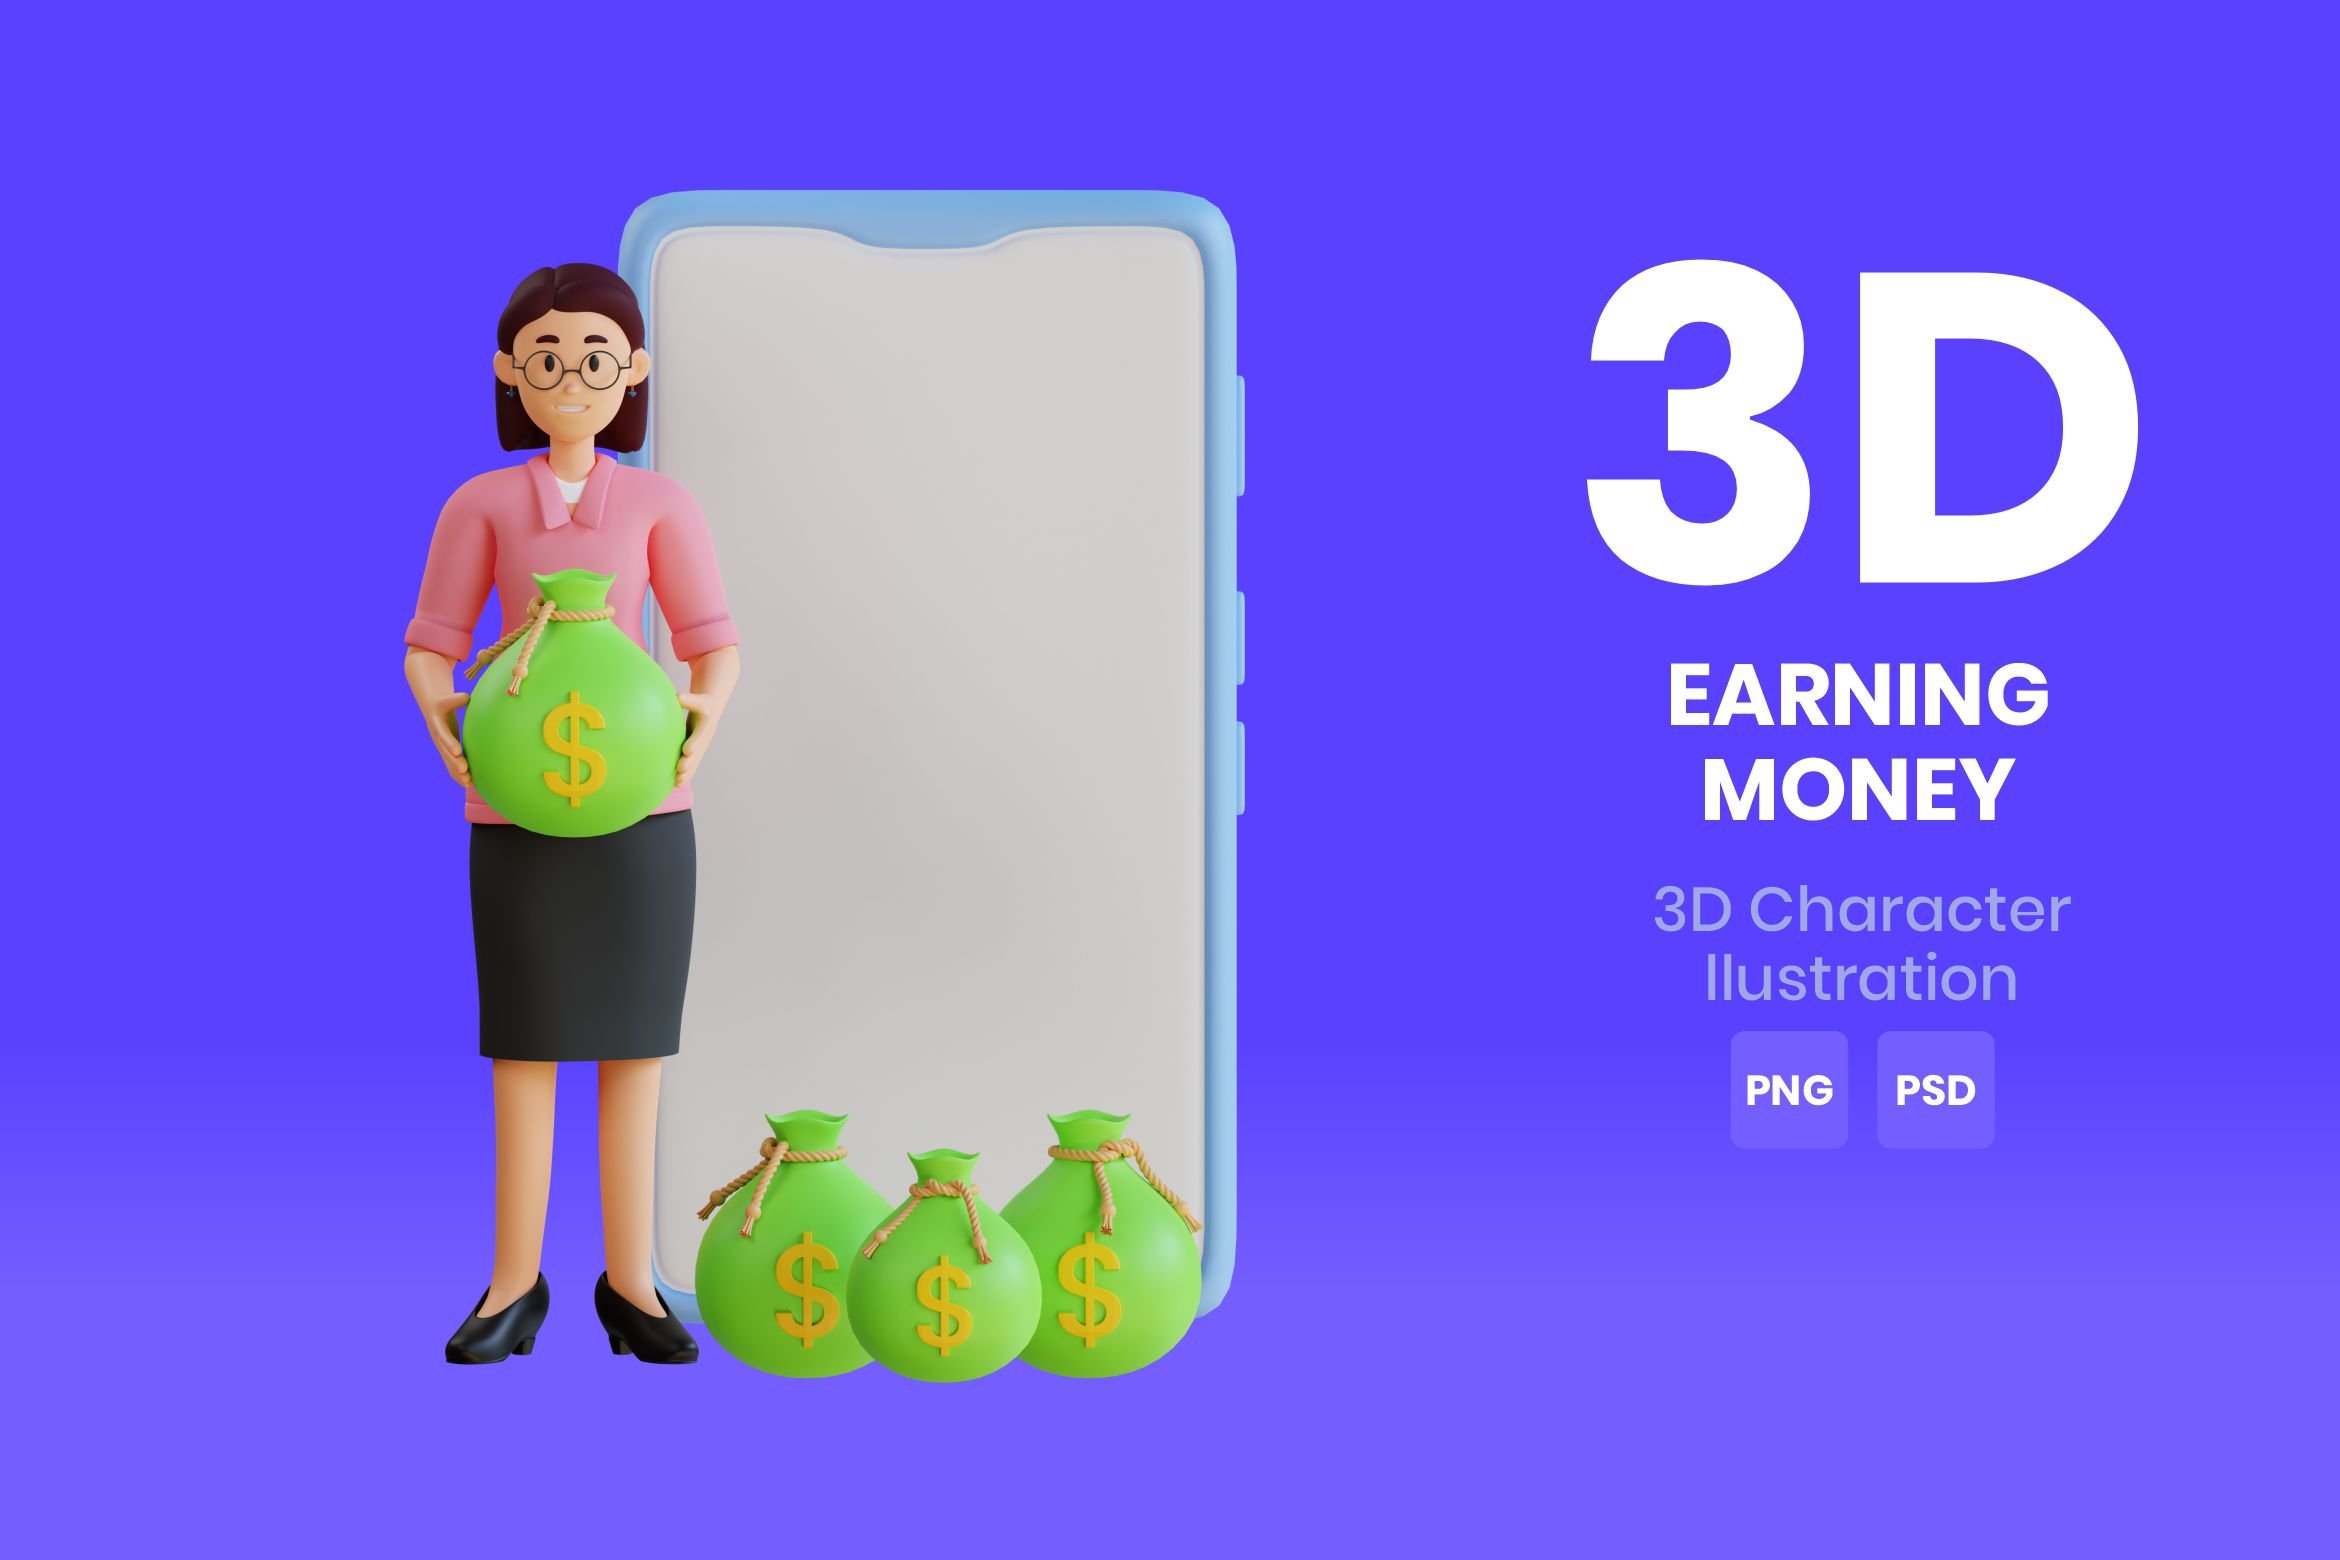 A woman standing next to a phone with money bags on it.